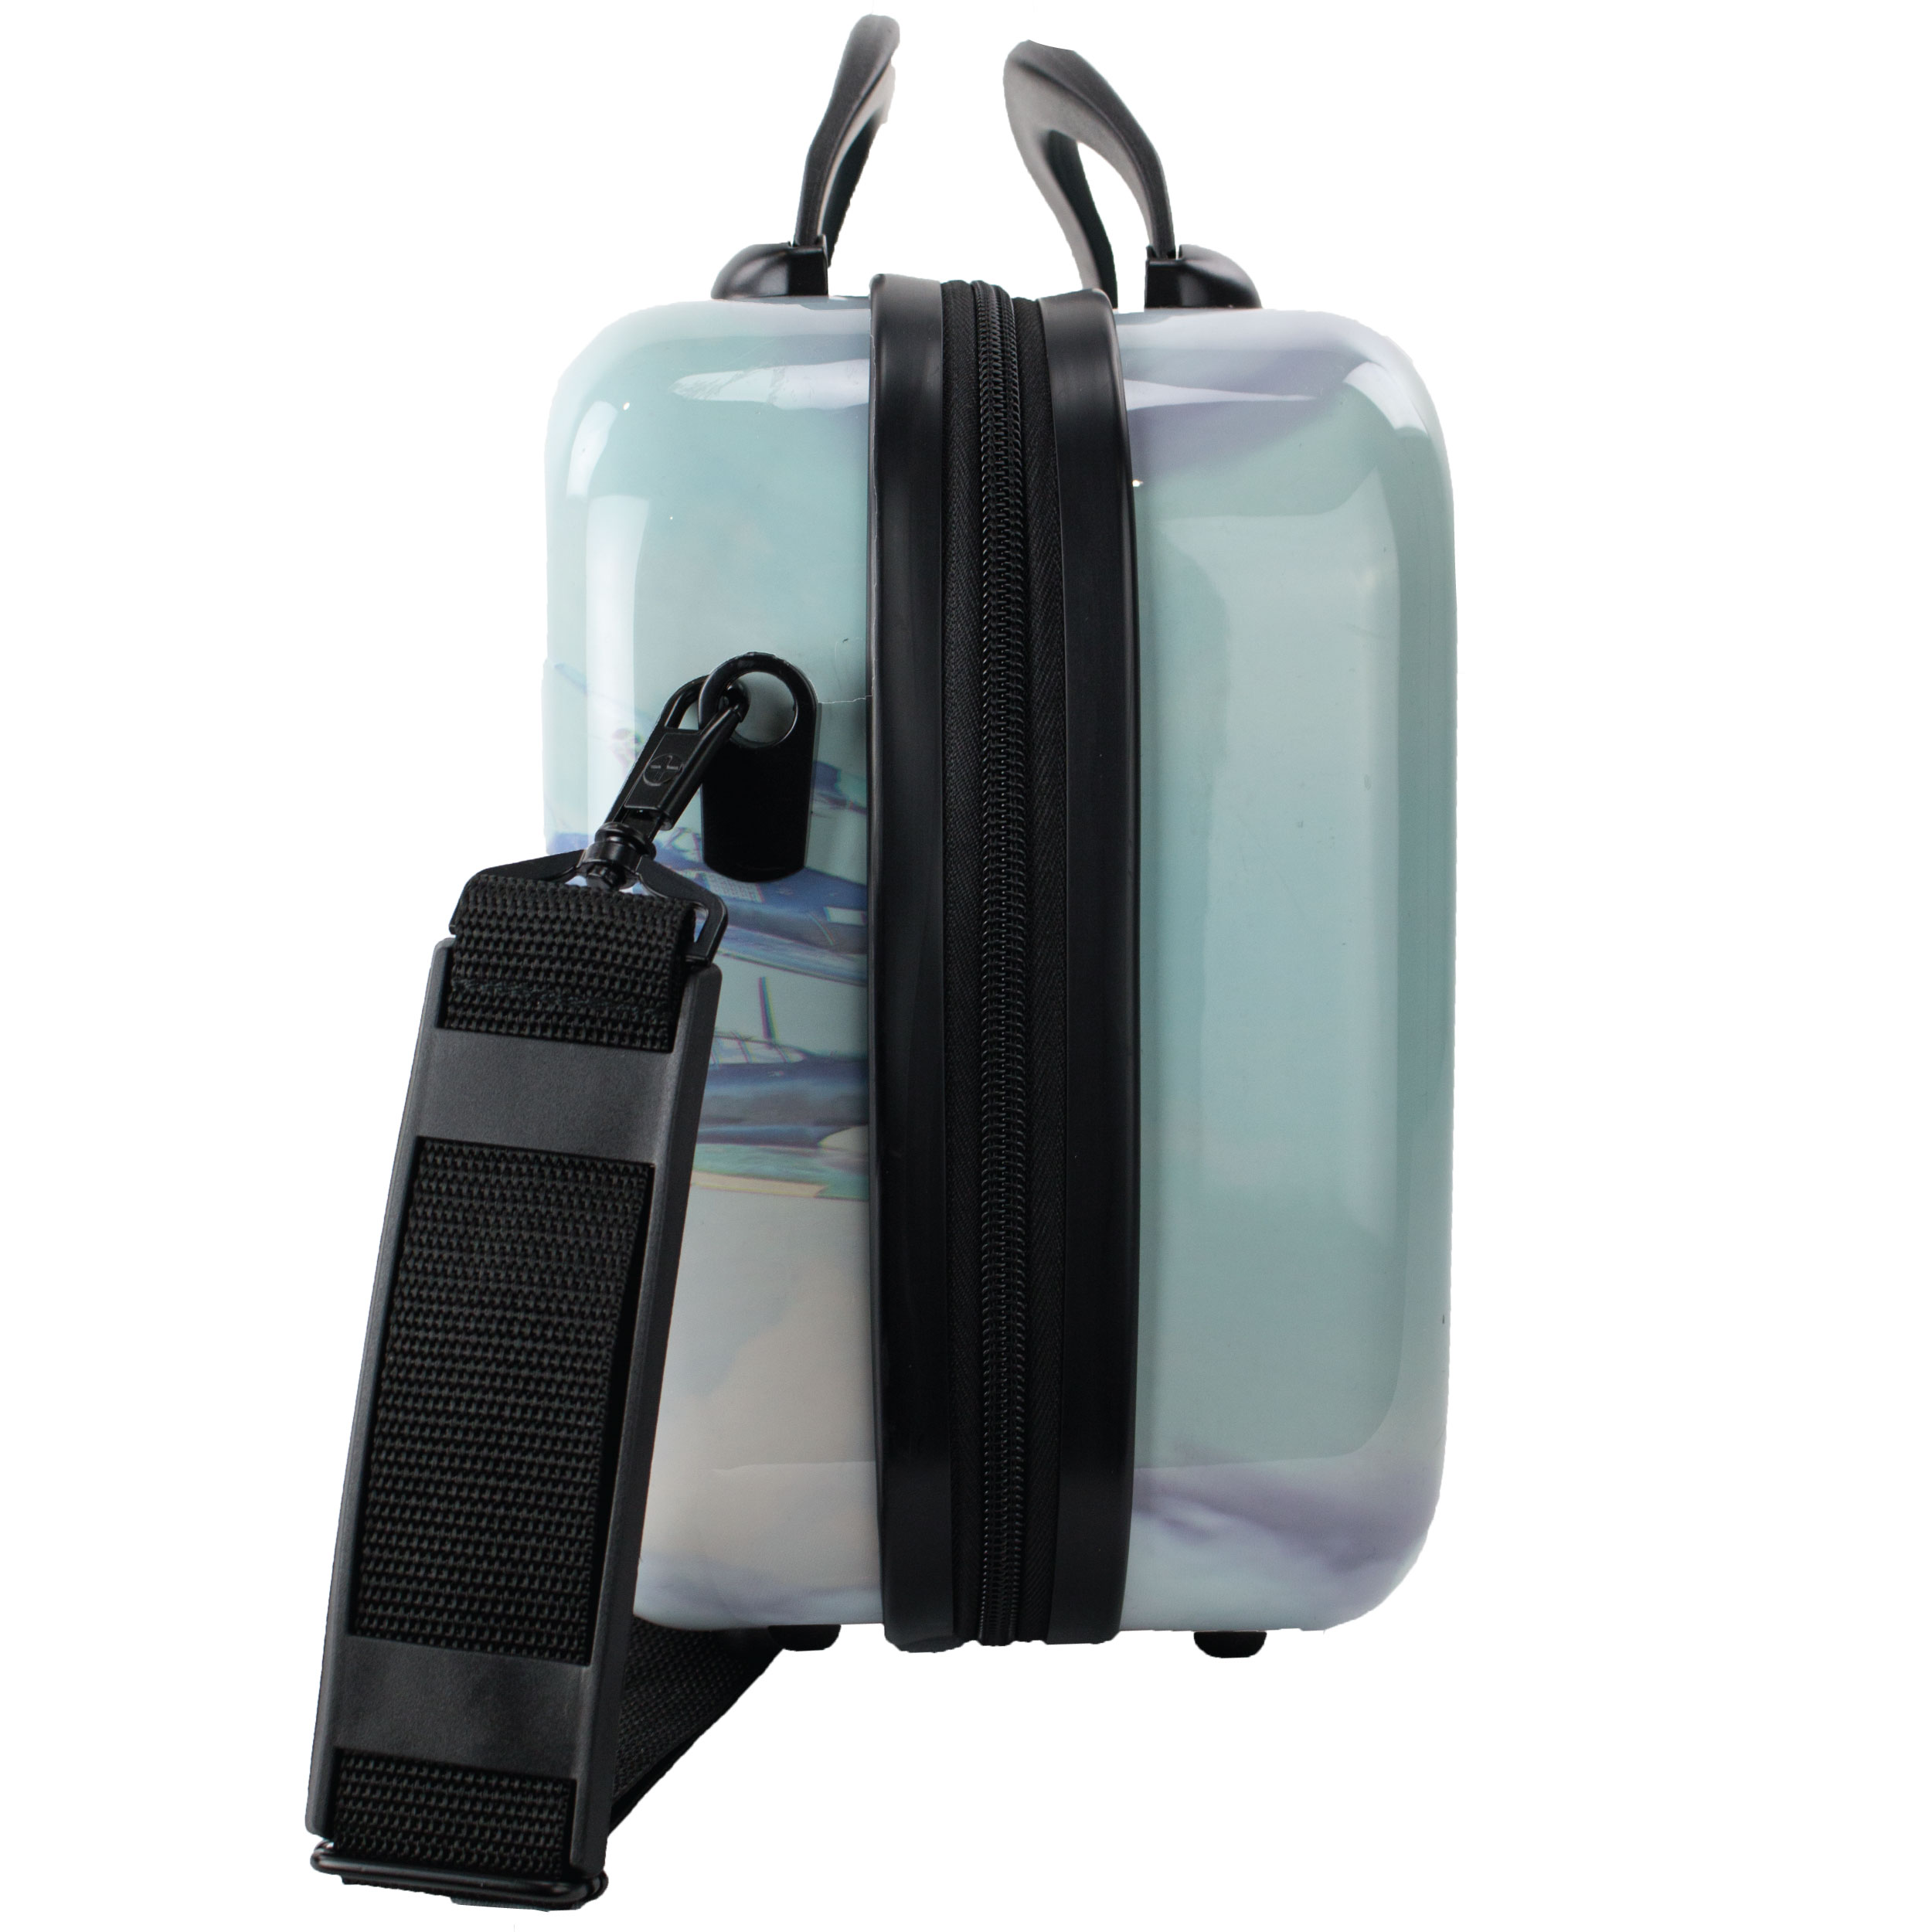 CHM-777 BEAUTY CASE - Chariot Travelware